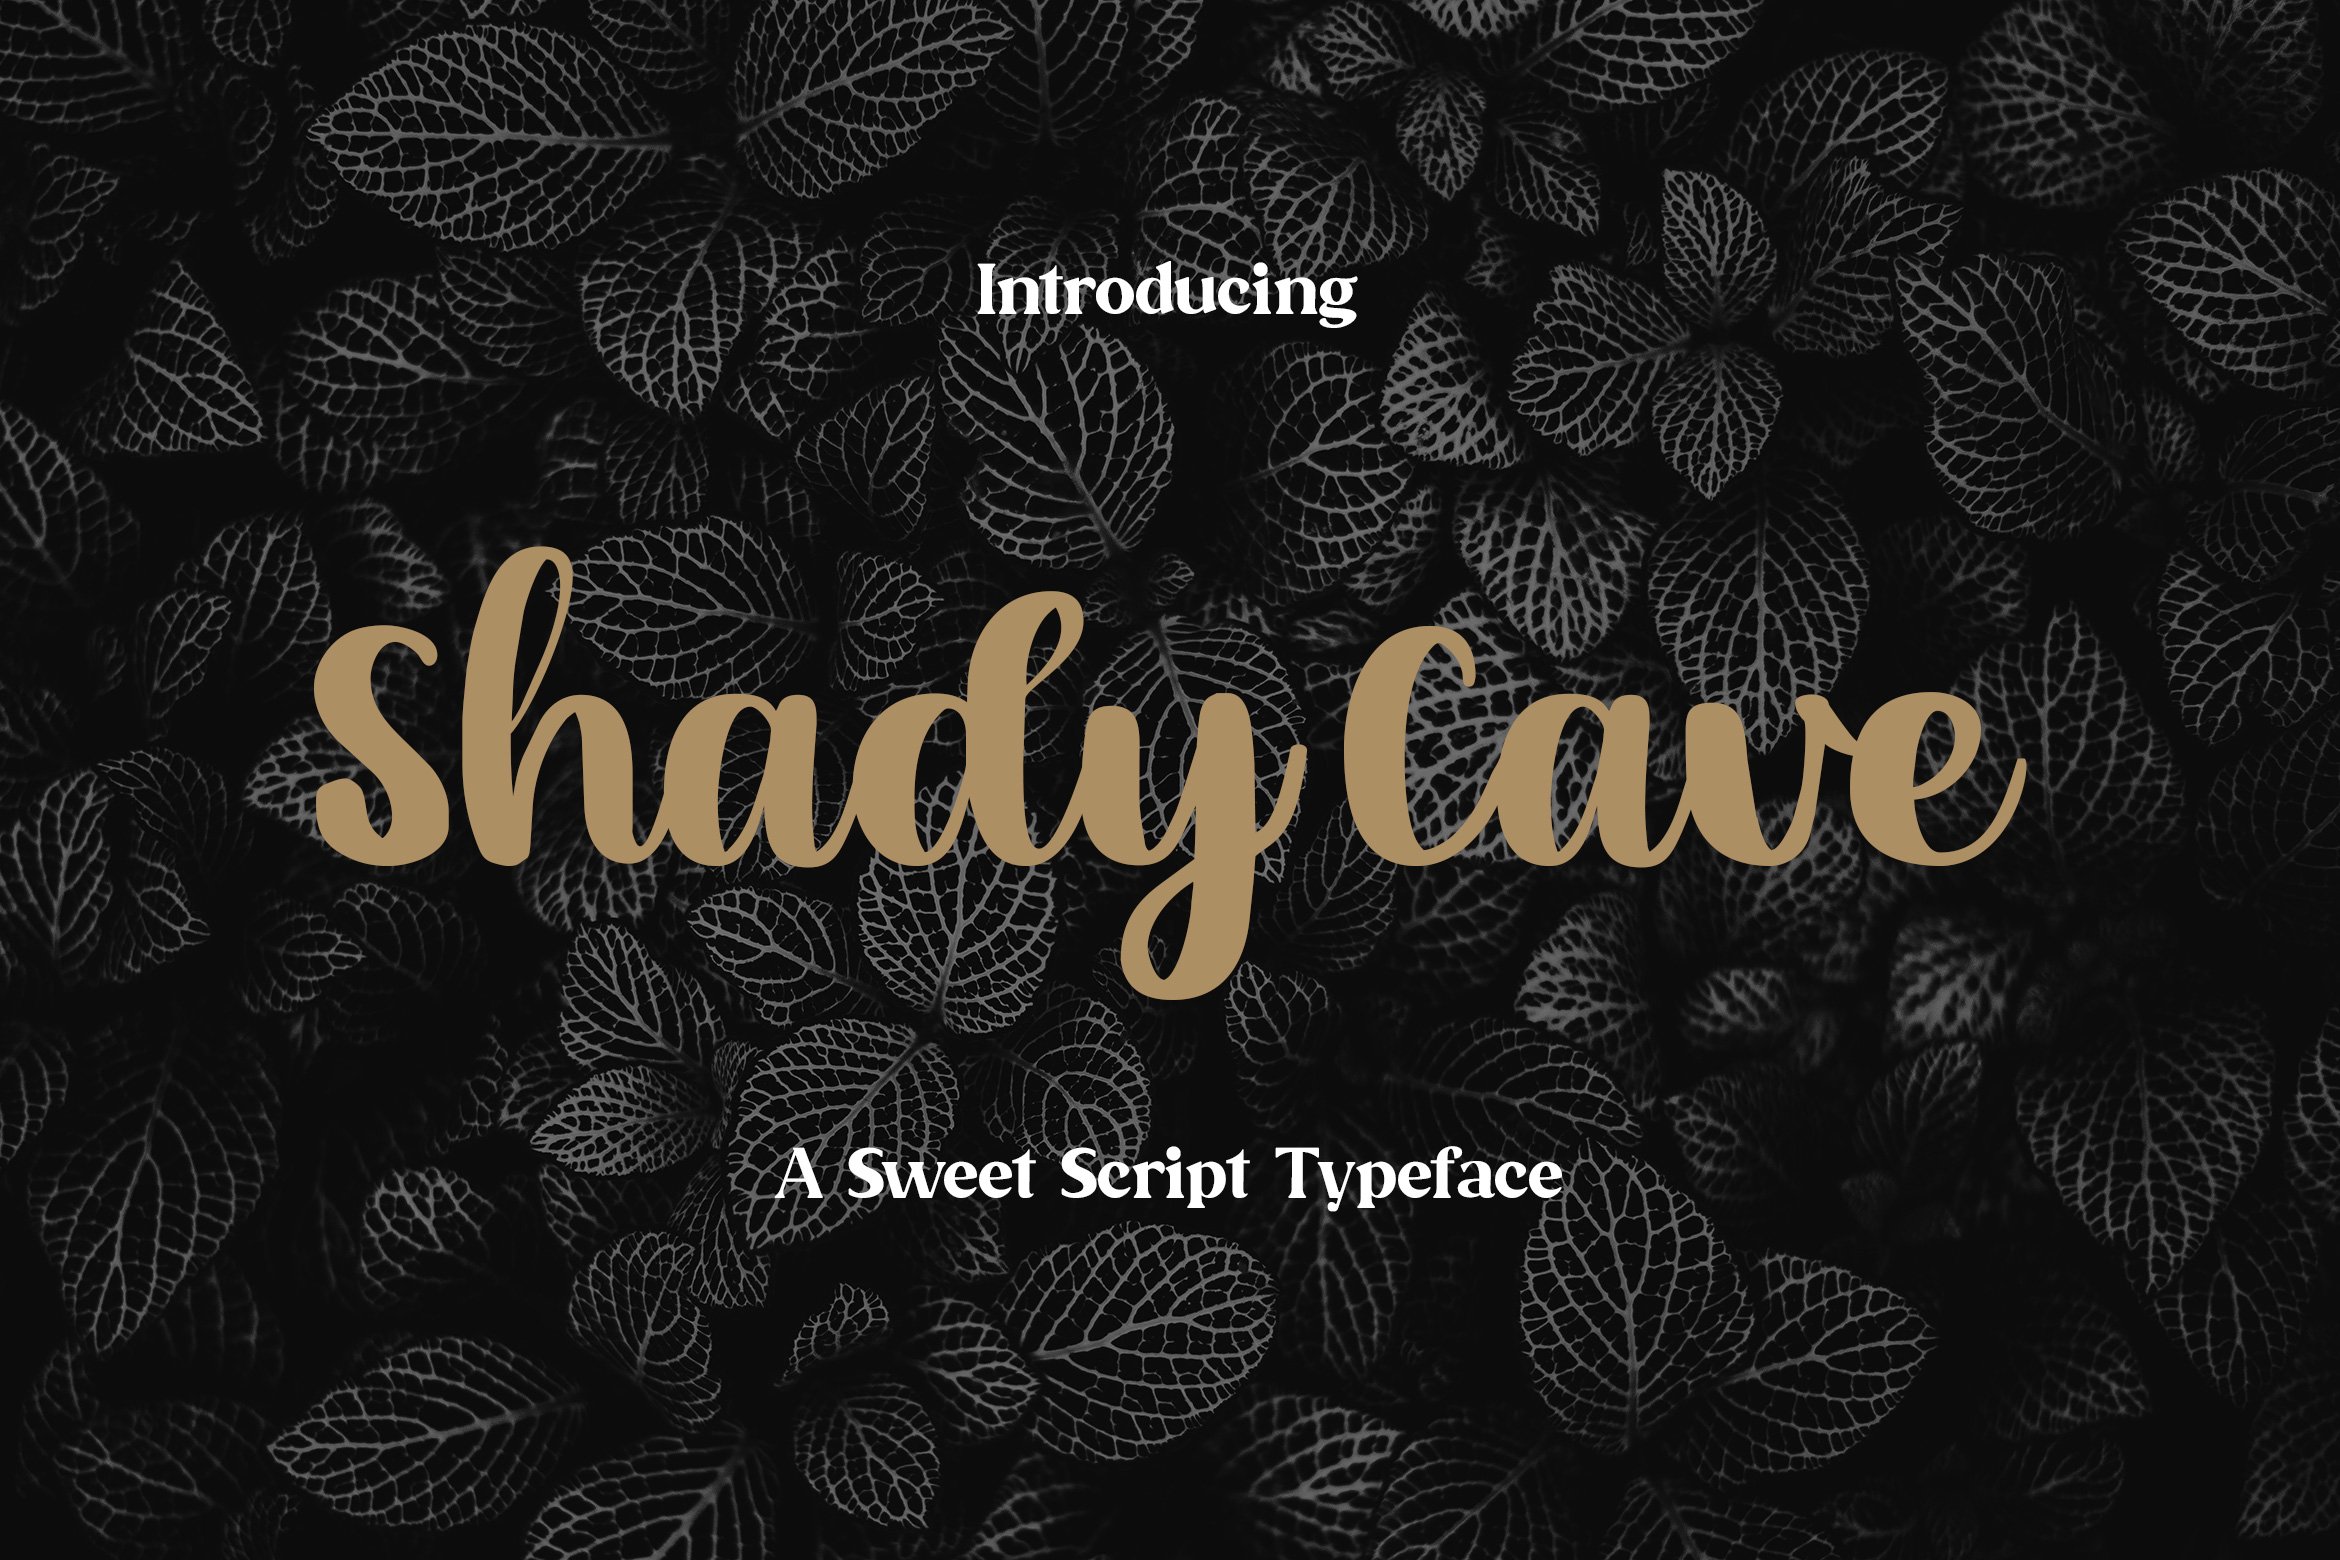 Shady Cave - Script Font cover image.